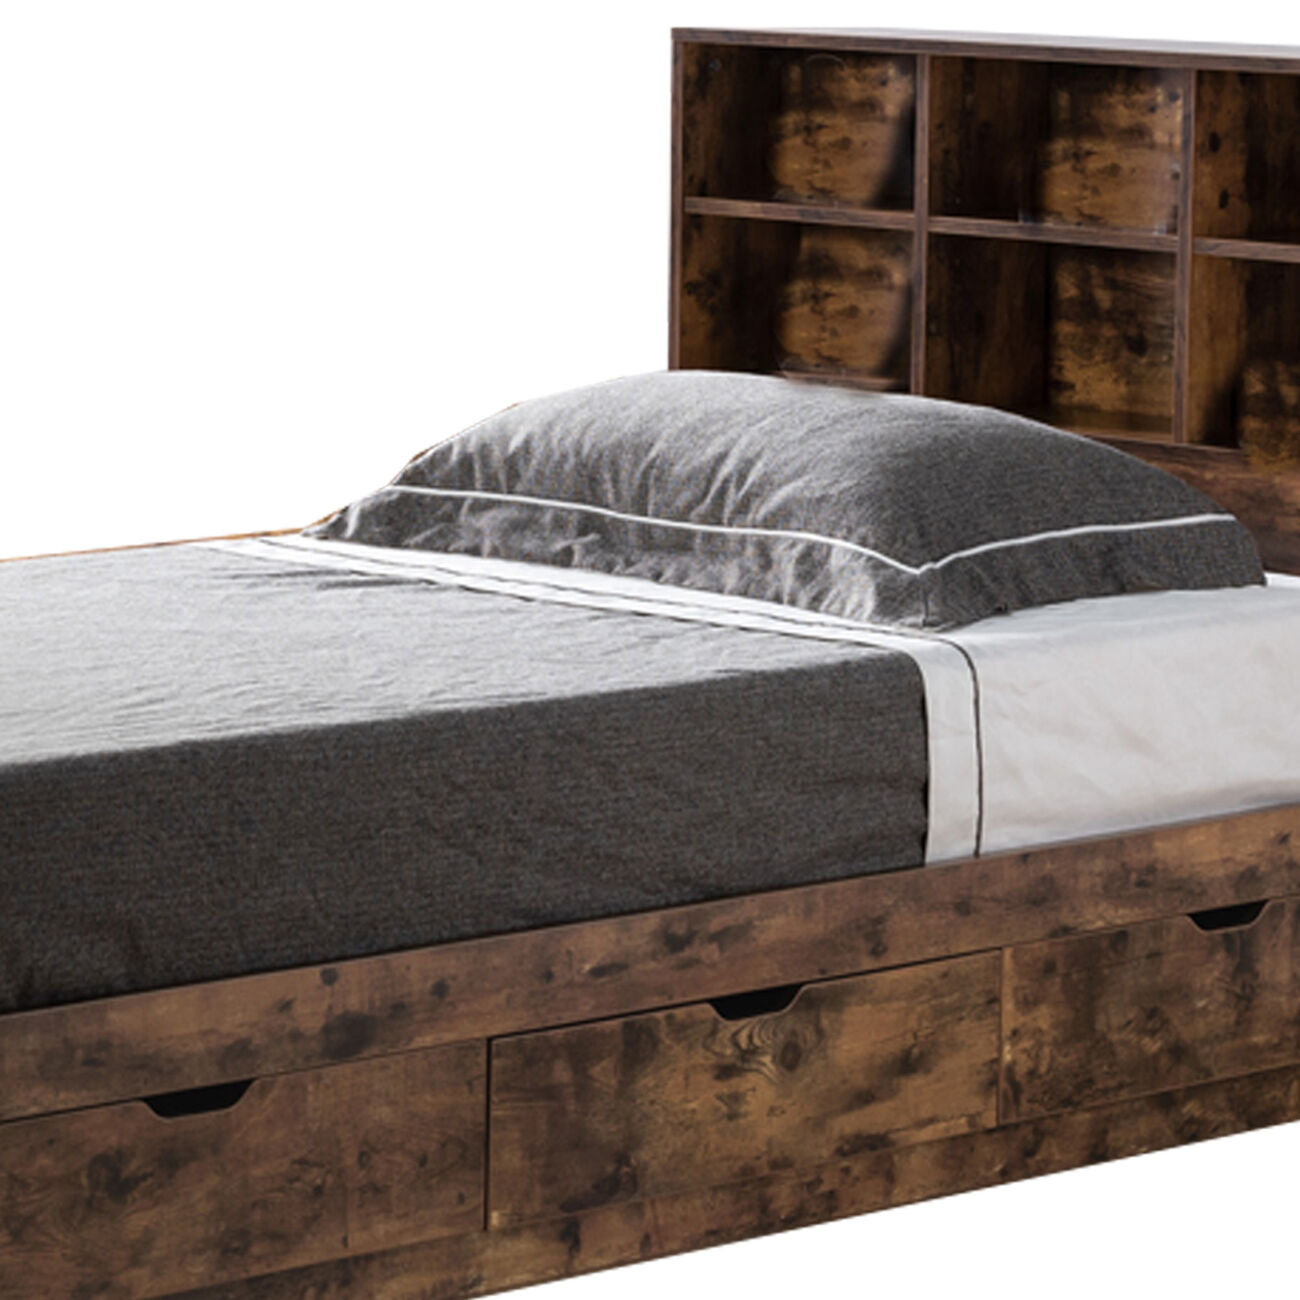 Wooden Frame 3 Drawers Twin Size Chest Bed, Distressed Brown